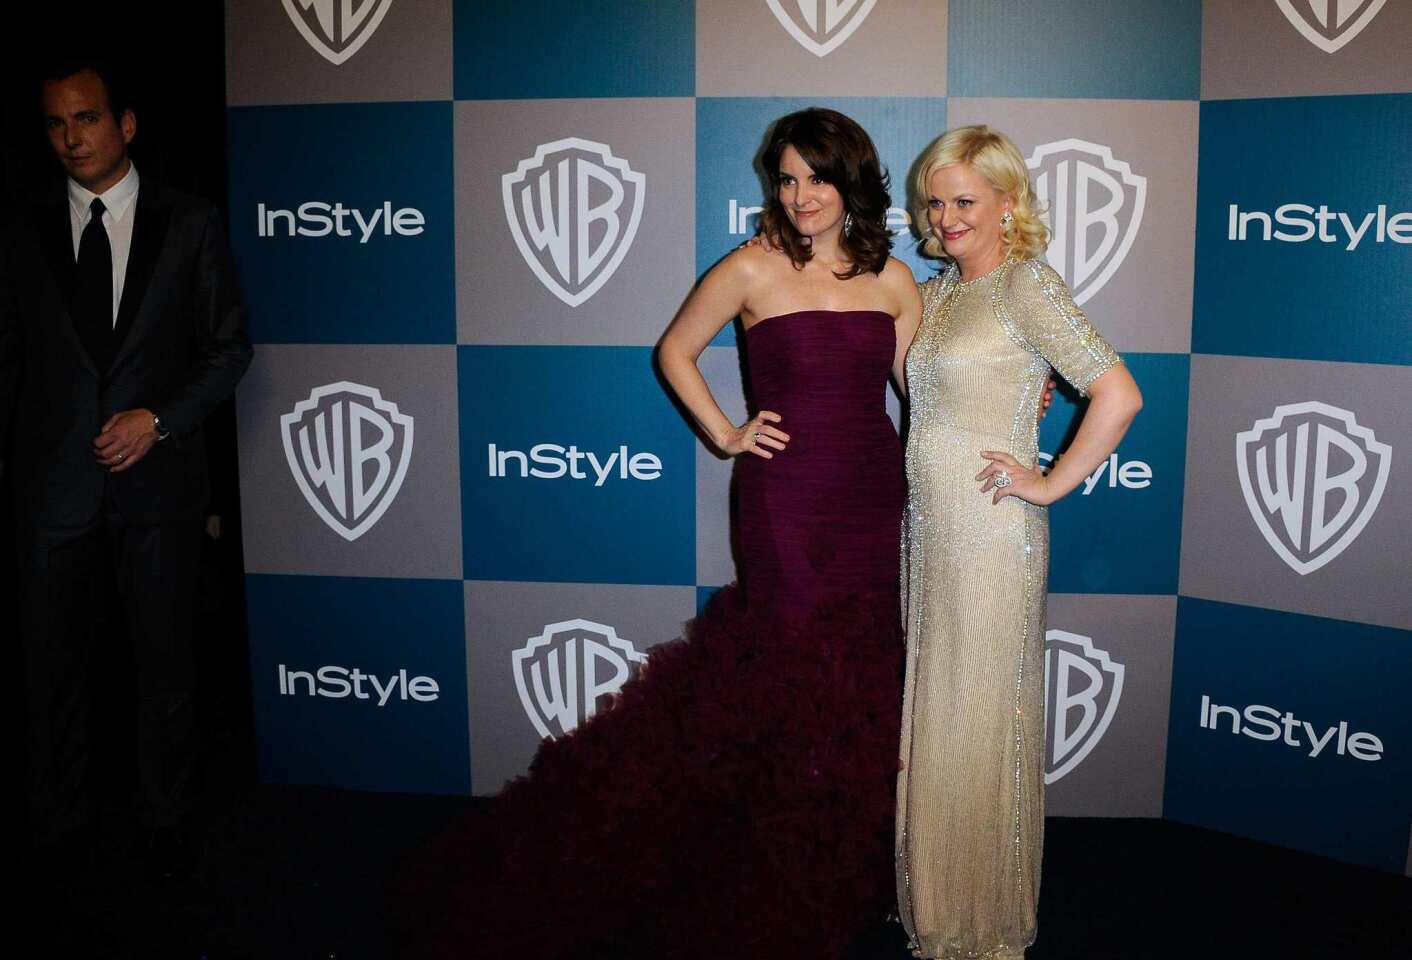 Warner Bros. and InStyle Golden Globe party